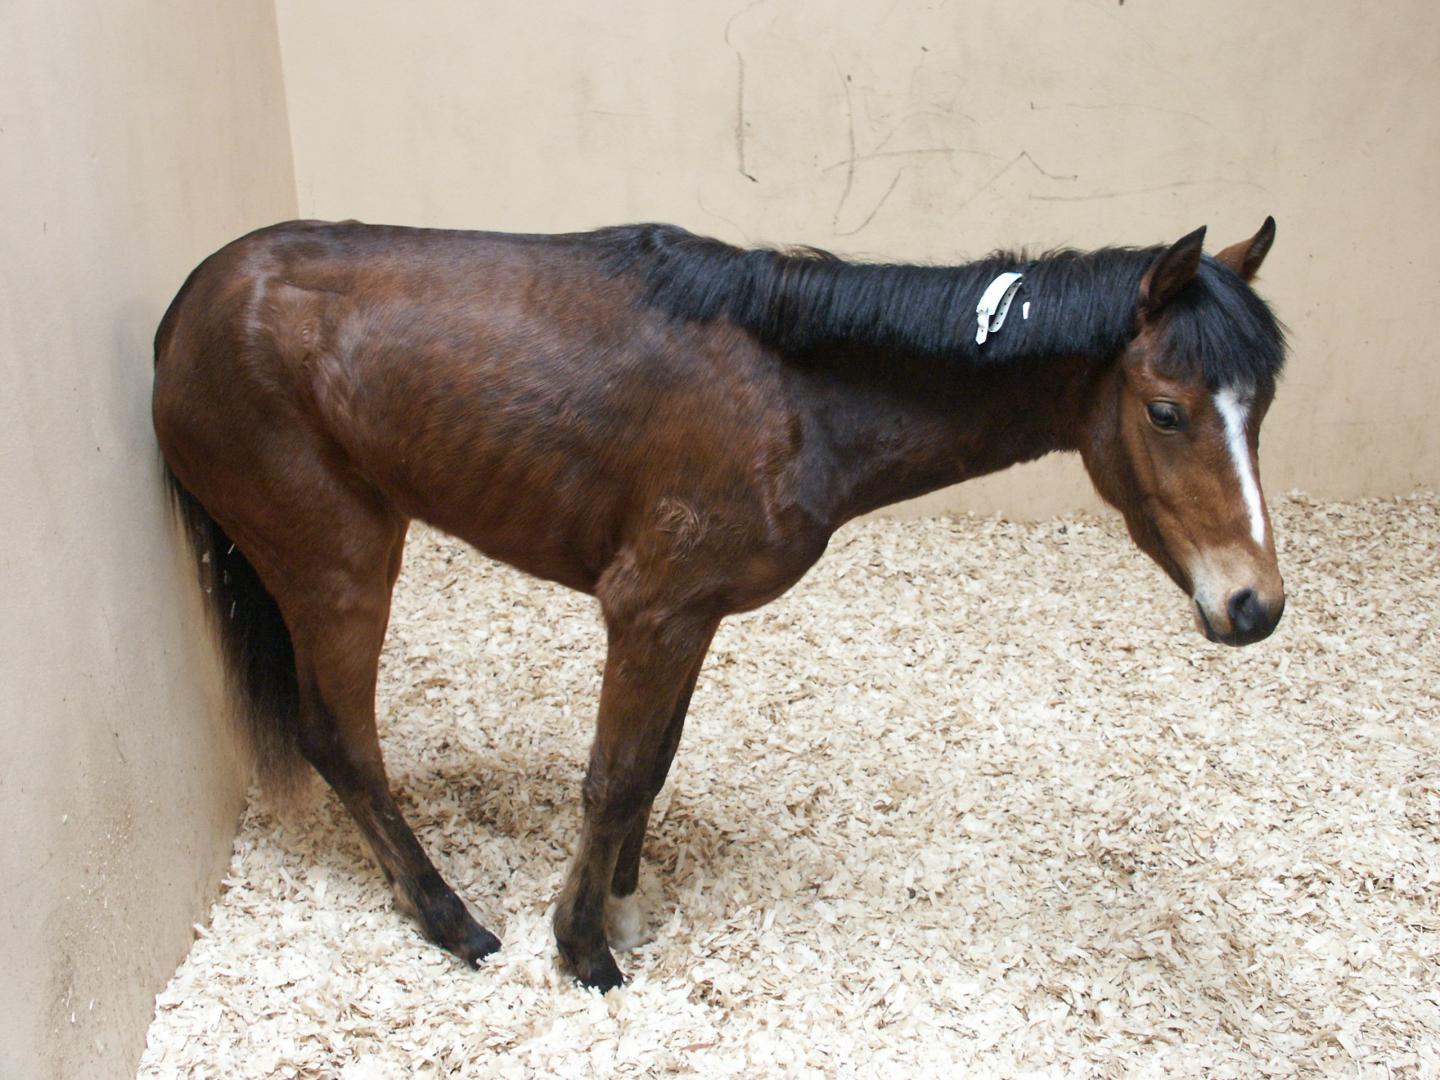 Horse Sickness Shares Signs of Human Brain Disorders